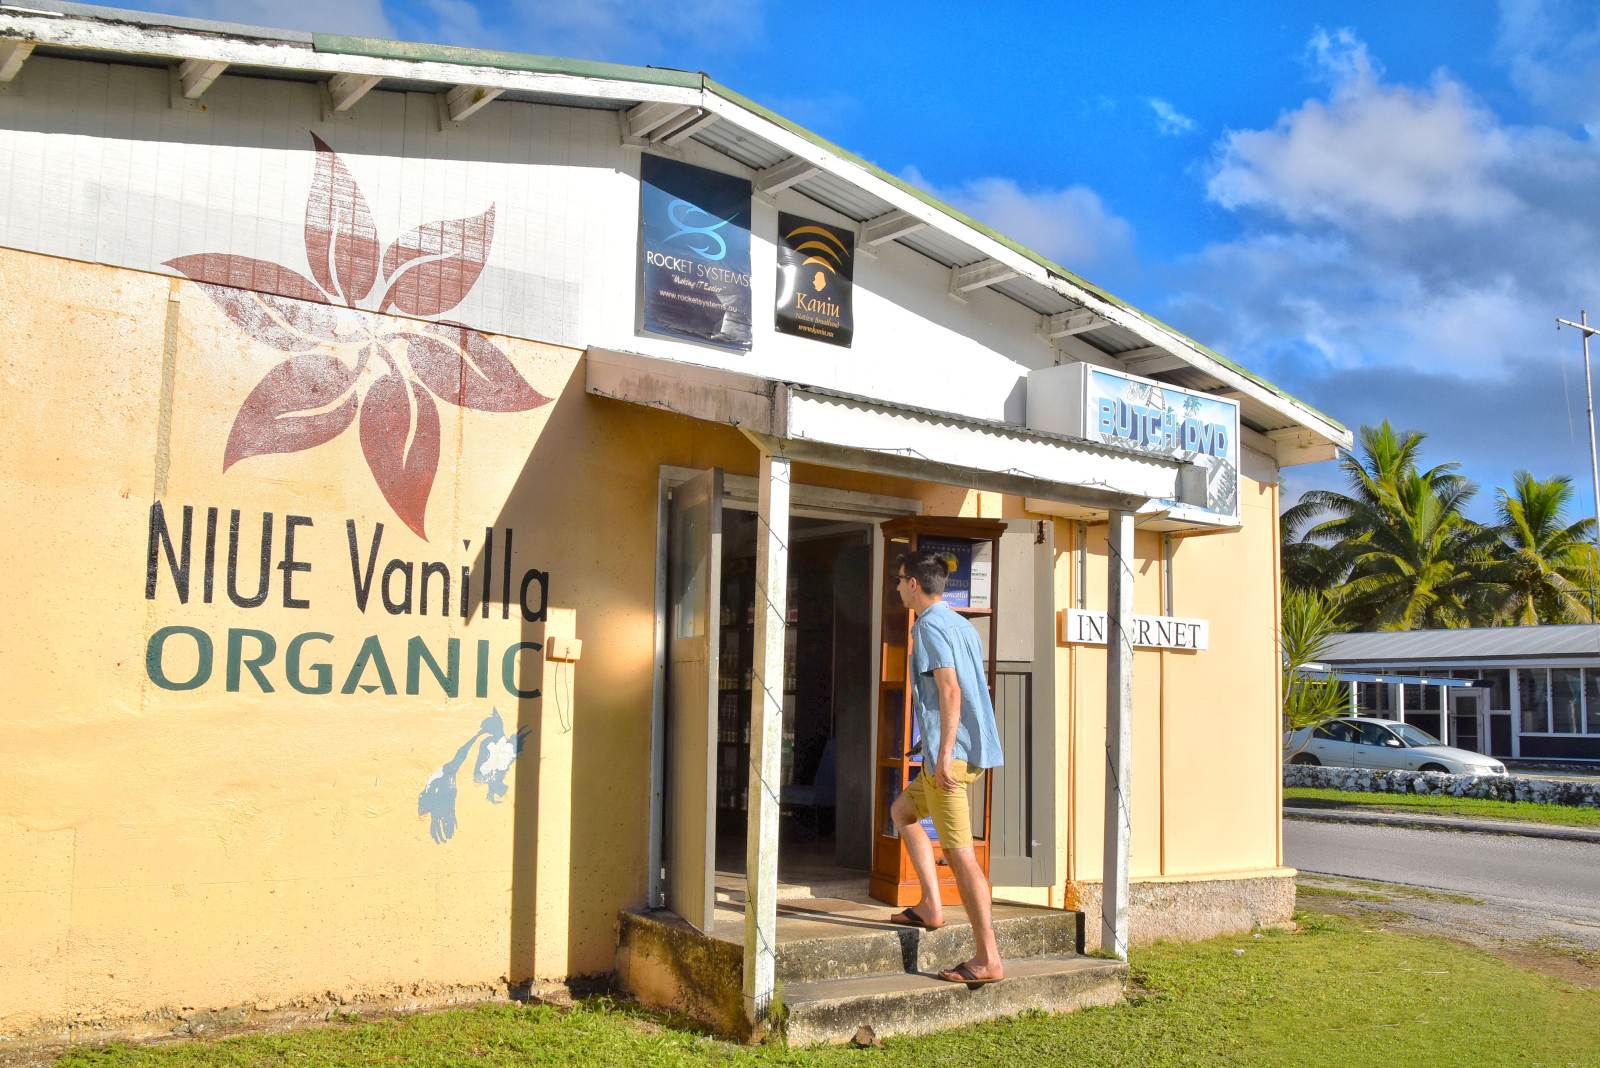 The Guide to Shopping in Niue